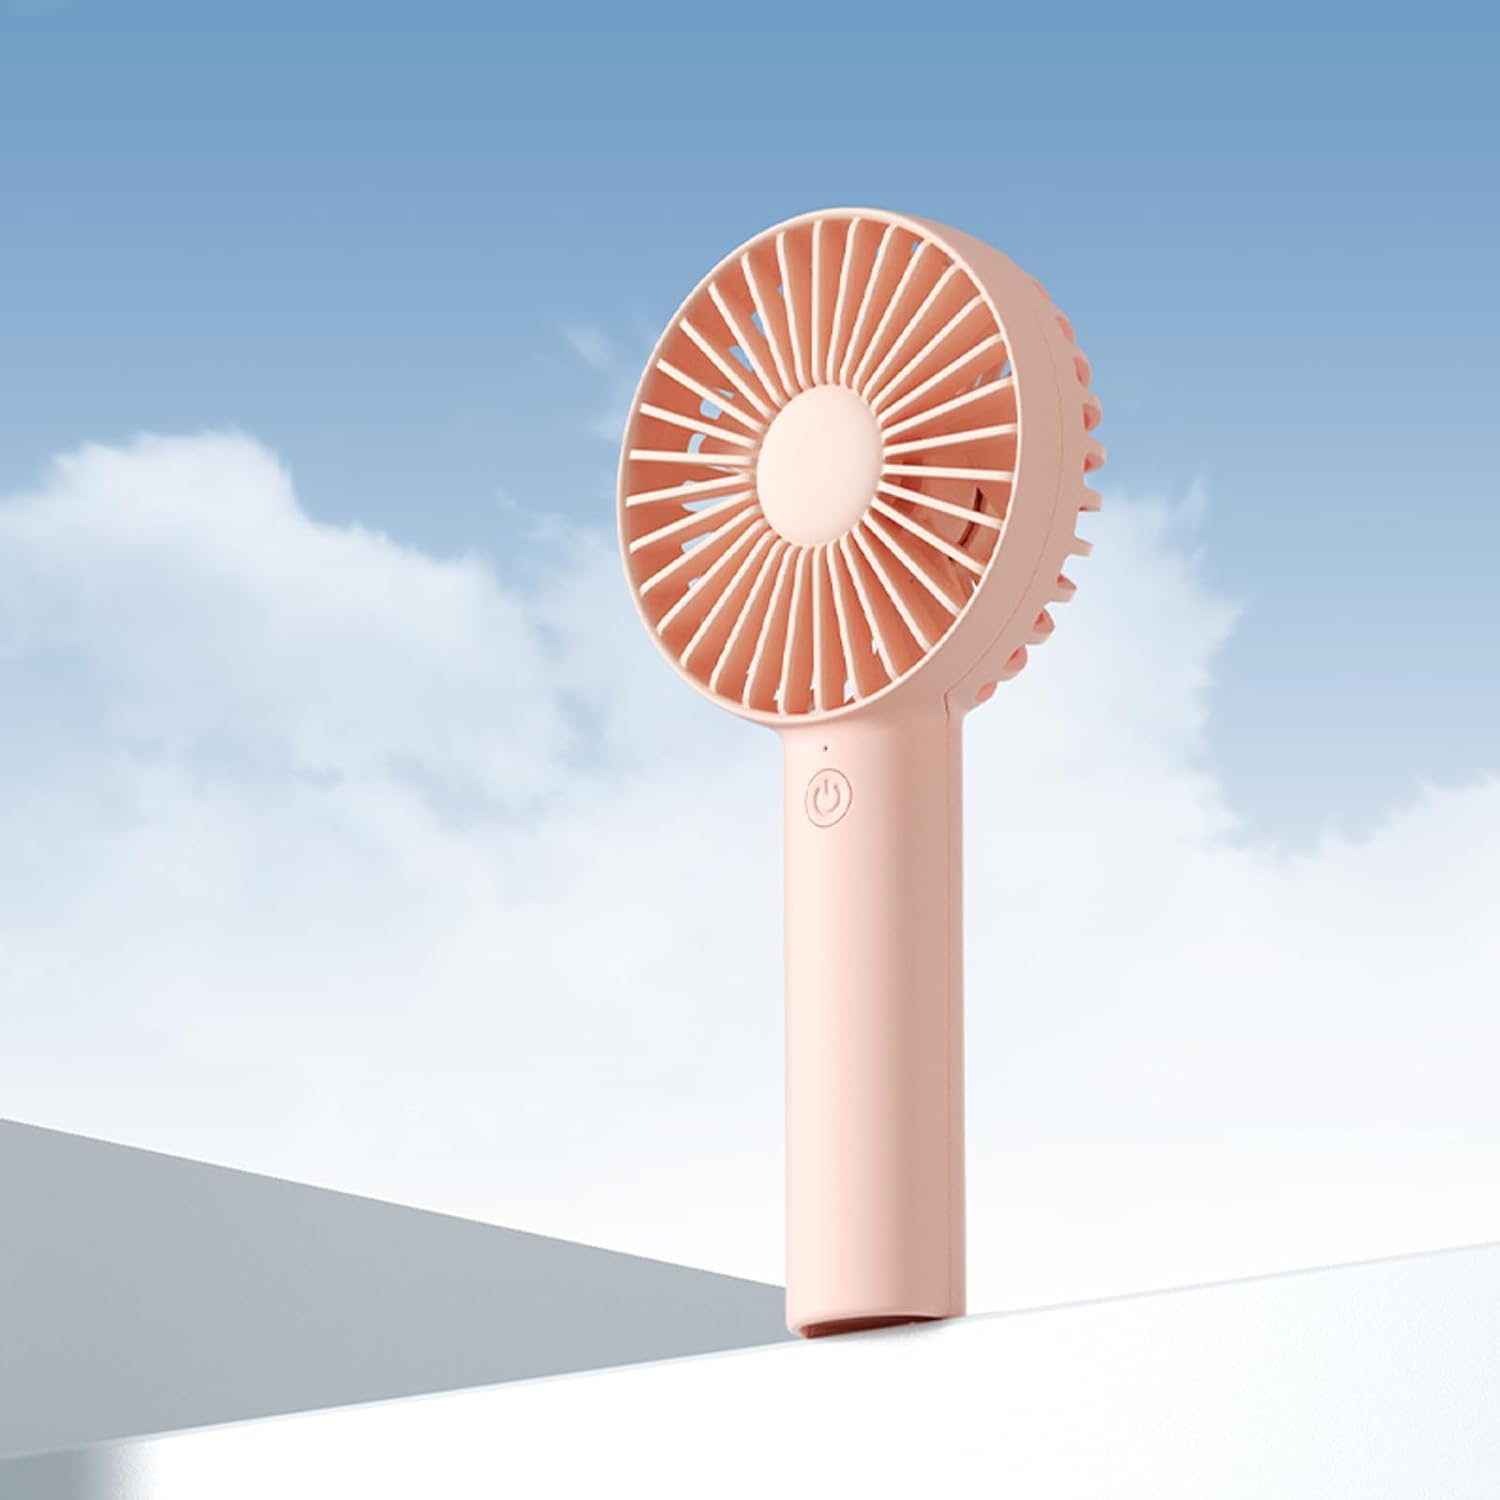 JISULIFE Handheld Fan, 4500mAh Portable Small Fan with 3 Speeds, USB Rechargeable Hand Fan, Personal Fan Battery Operate for Outdoor, Indoor, Commute, Office, Travel -Pink